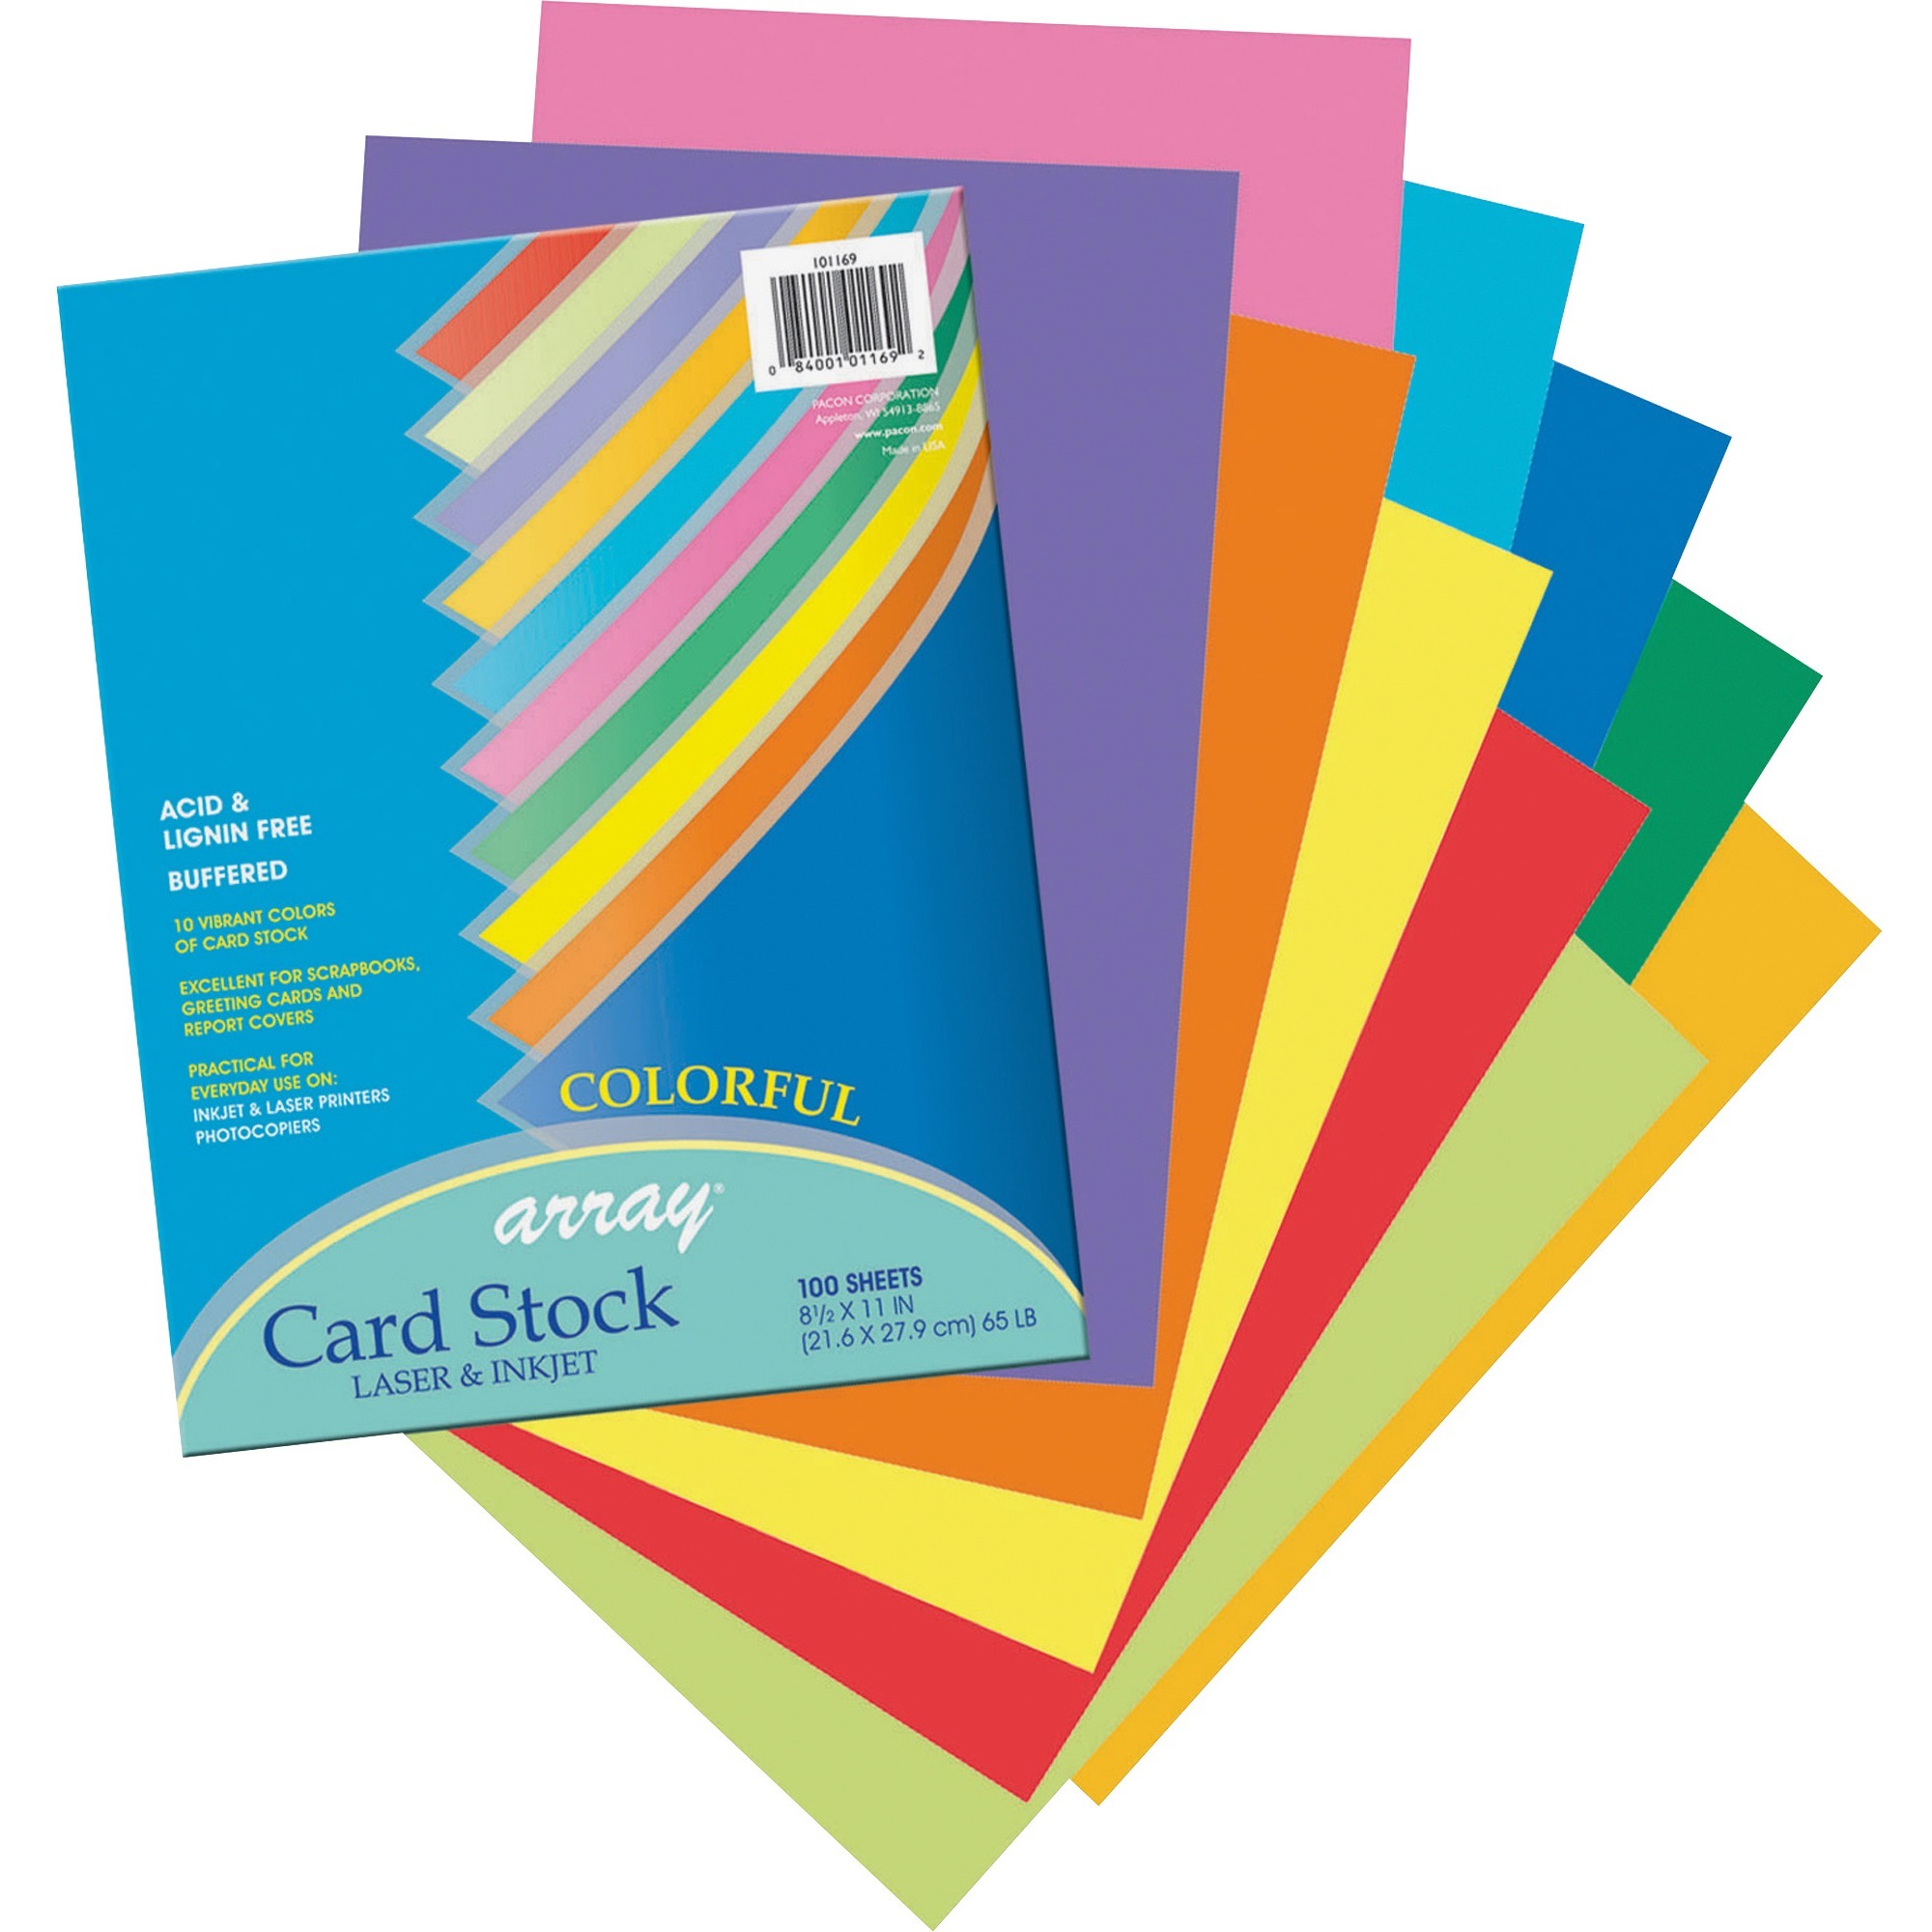 Colorful Card Stock - Ready-Set-Start